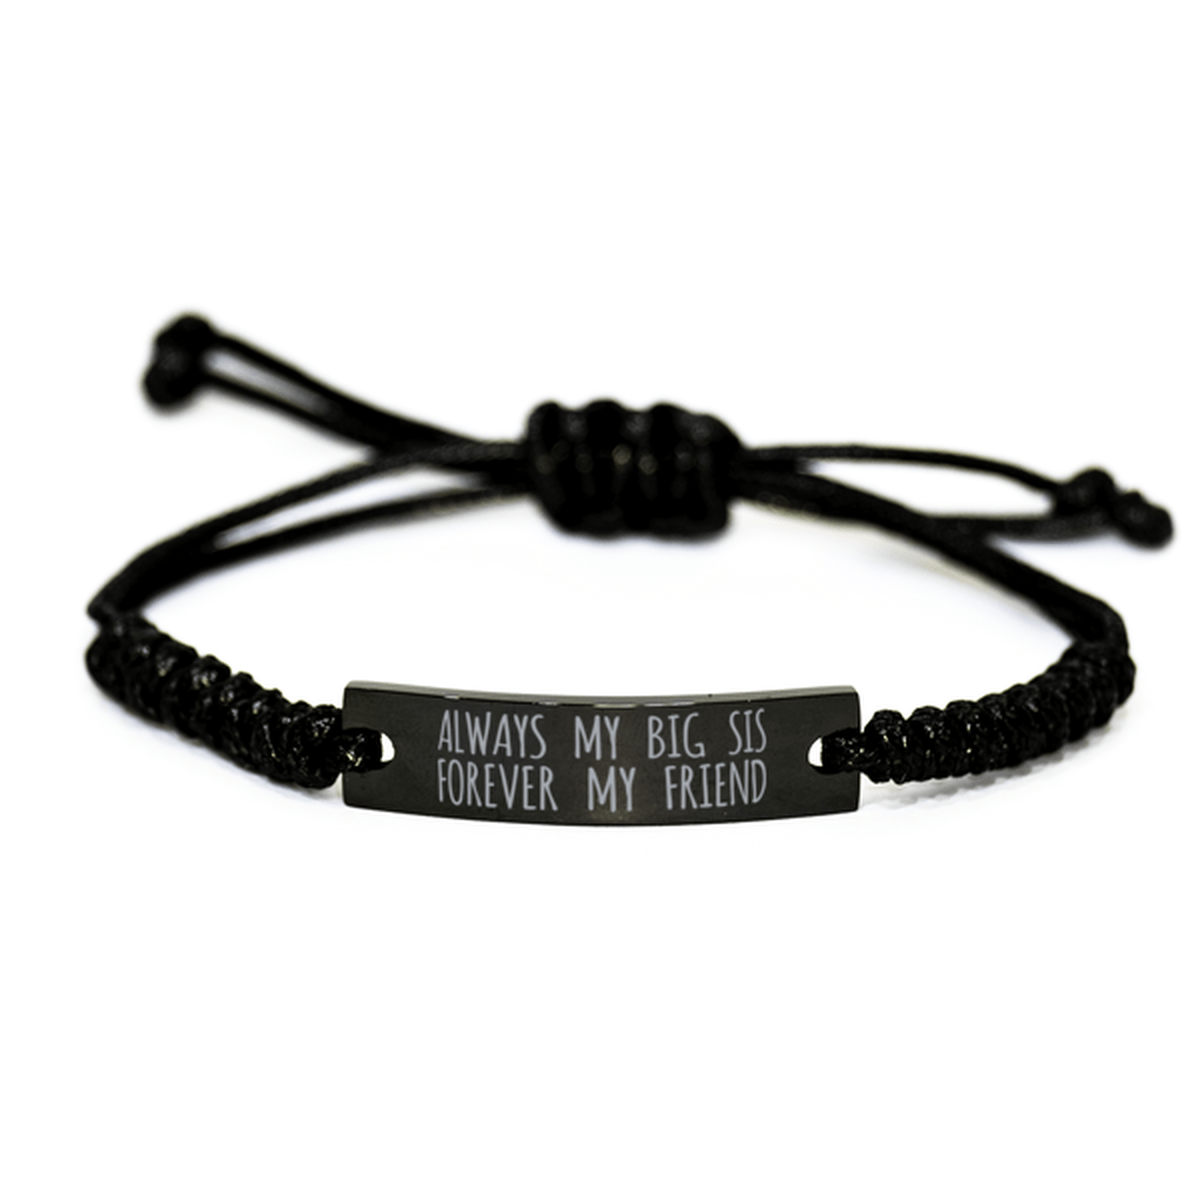 Inspirational Big Sis Black Rope Bracelet, Always My Big Sis Forever My Friend, Best Birthday Gifts For Family